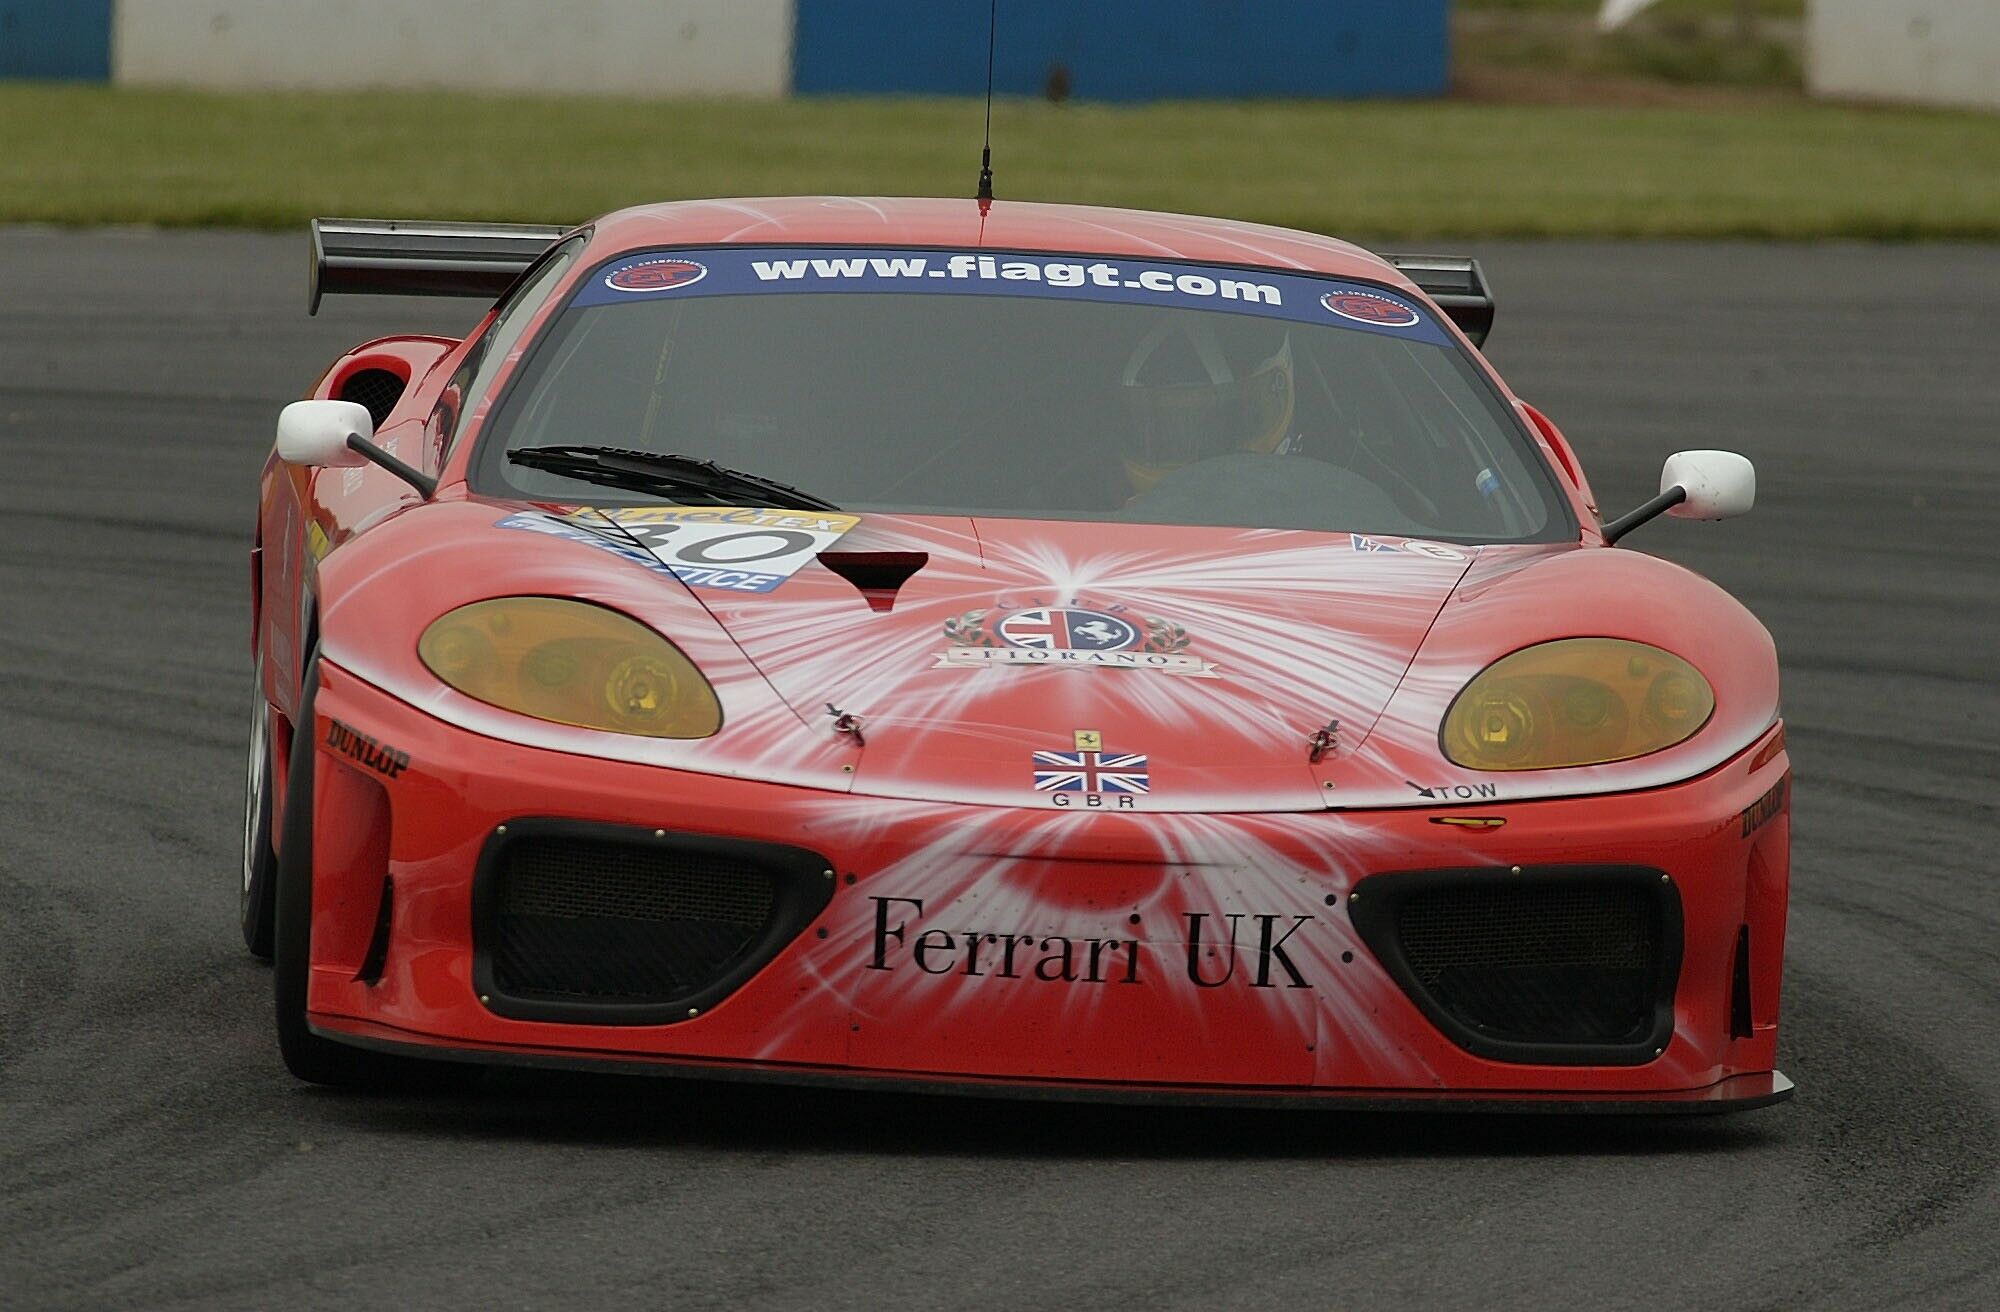 TMC are running a third car at Donington Park under the Veloqx banner for Le Mans winner Guy Smith and Andrew Kirkaldy